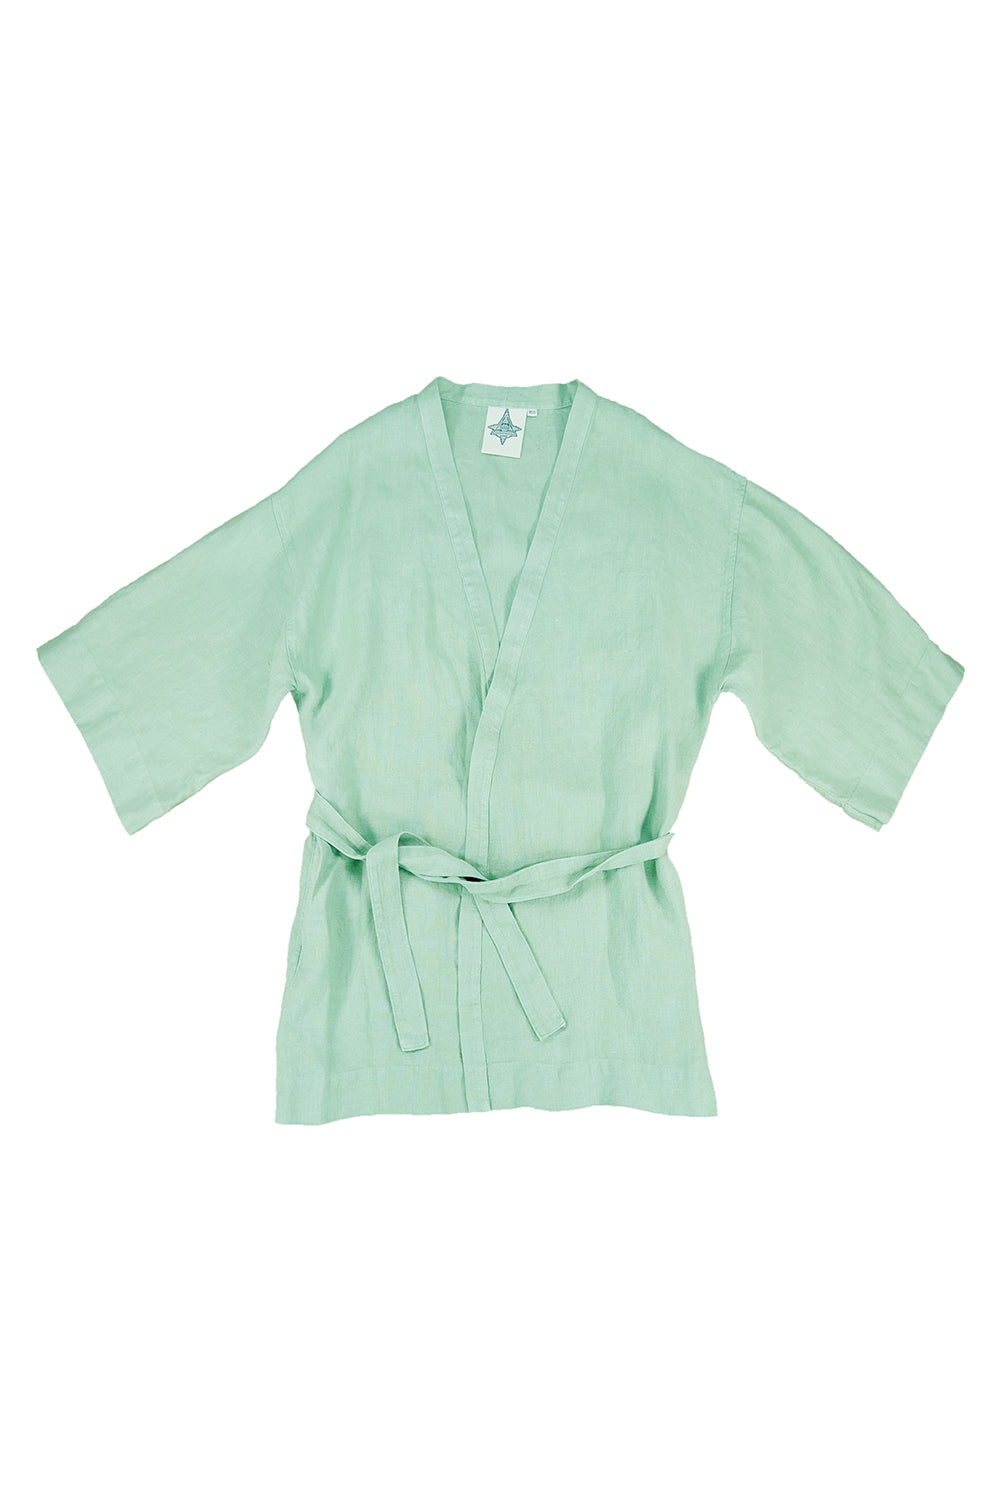 Bali Cover-up | Jungmaven Hemp Clothing & Accessories / Color: Sage Green